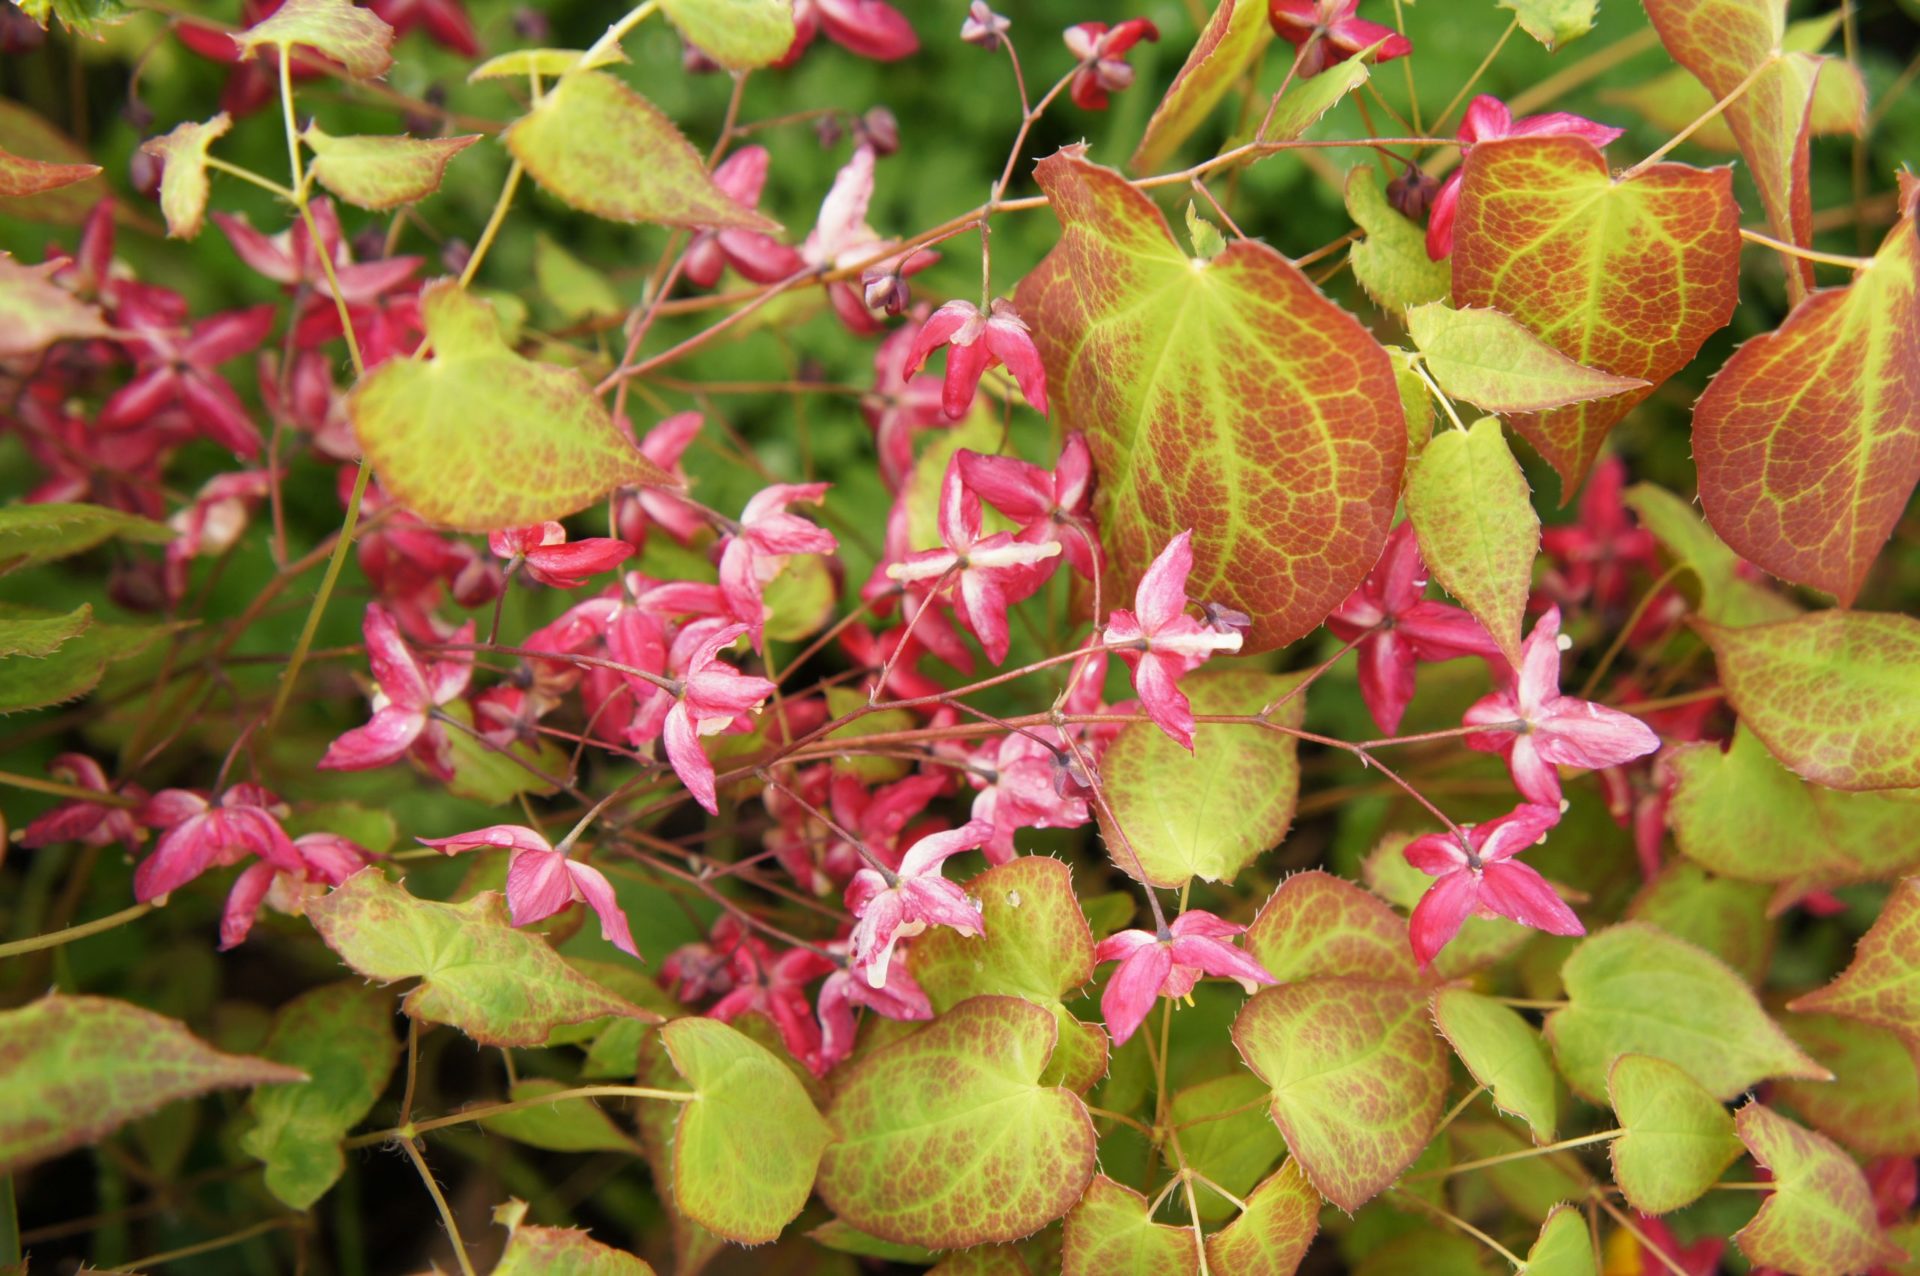 Pink Epimedium, also known as Barrenwort, Bishop's Hat, Fairy Wings, or Horney Goat Weed flowering perennial plant